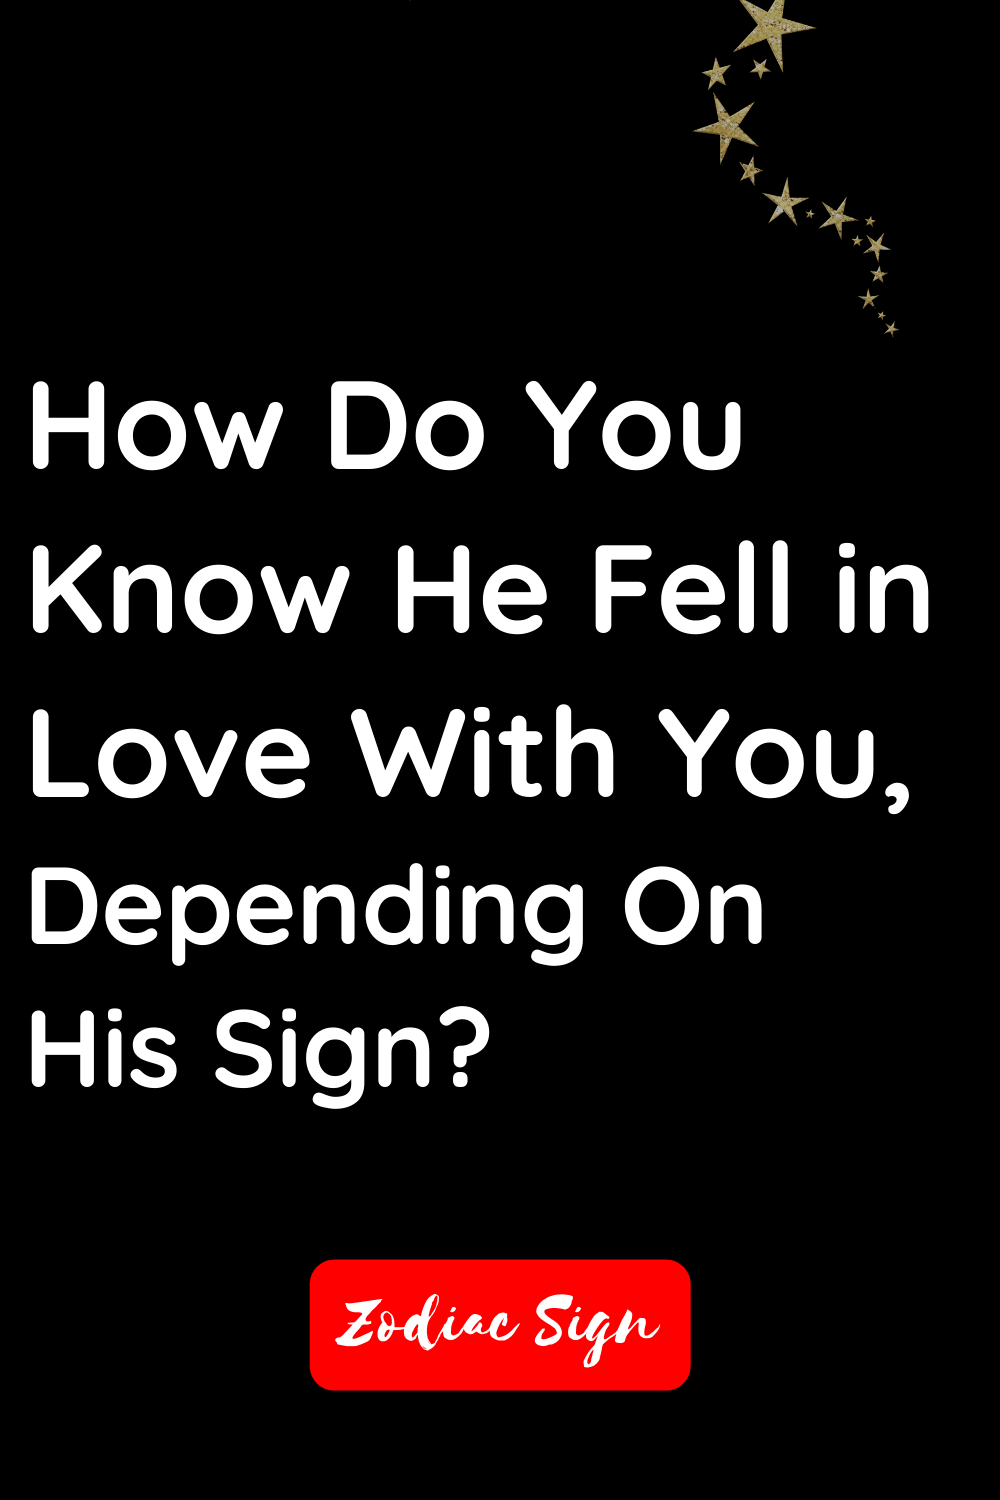 How do you know he fell in love with you, depending on his sign?